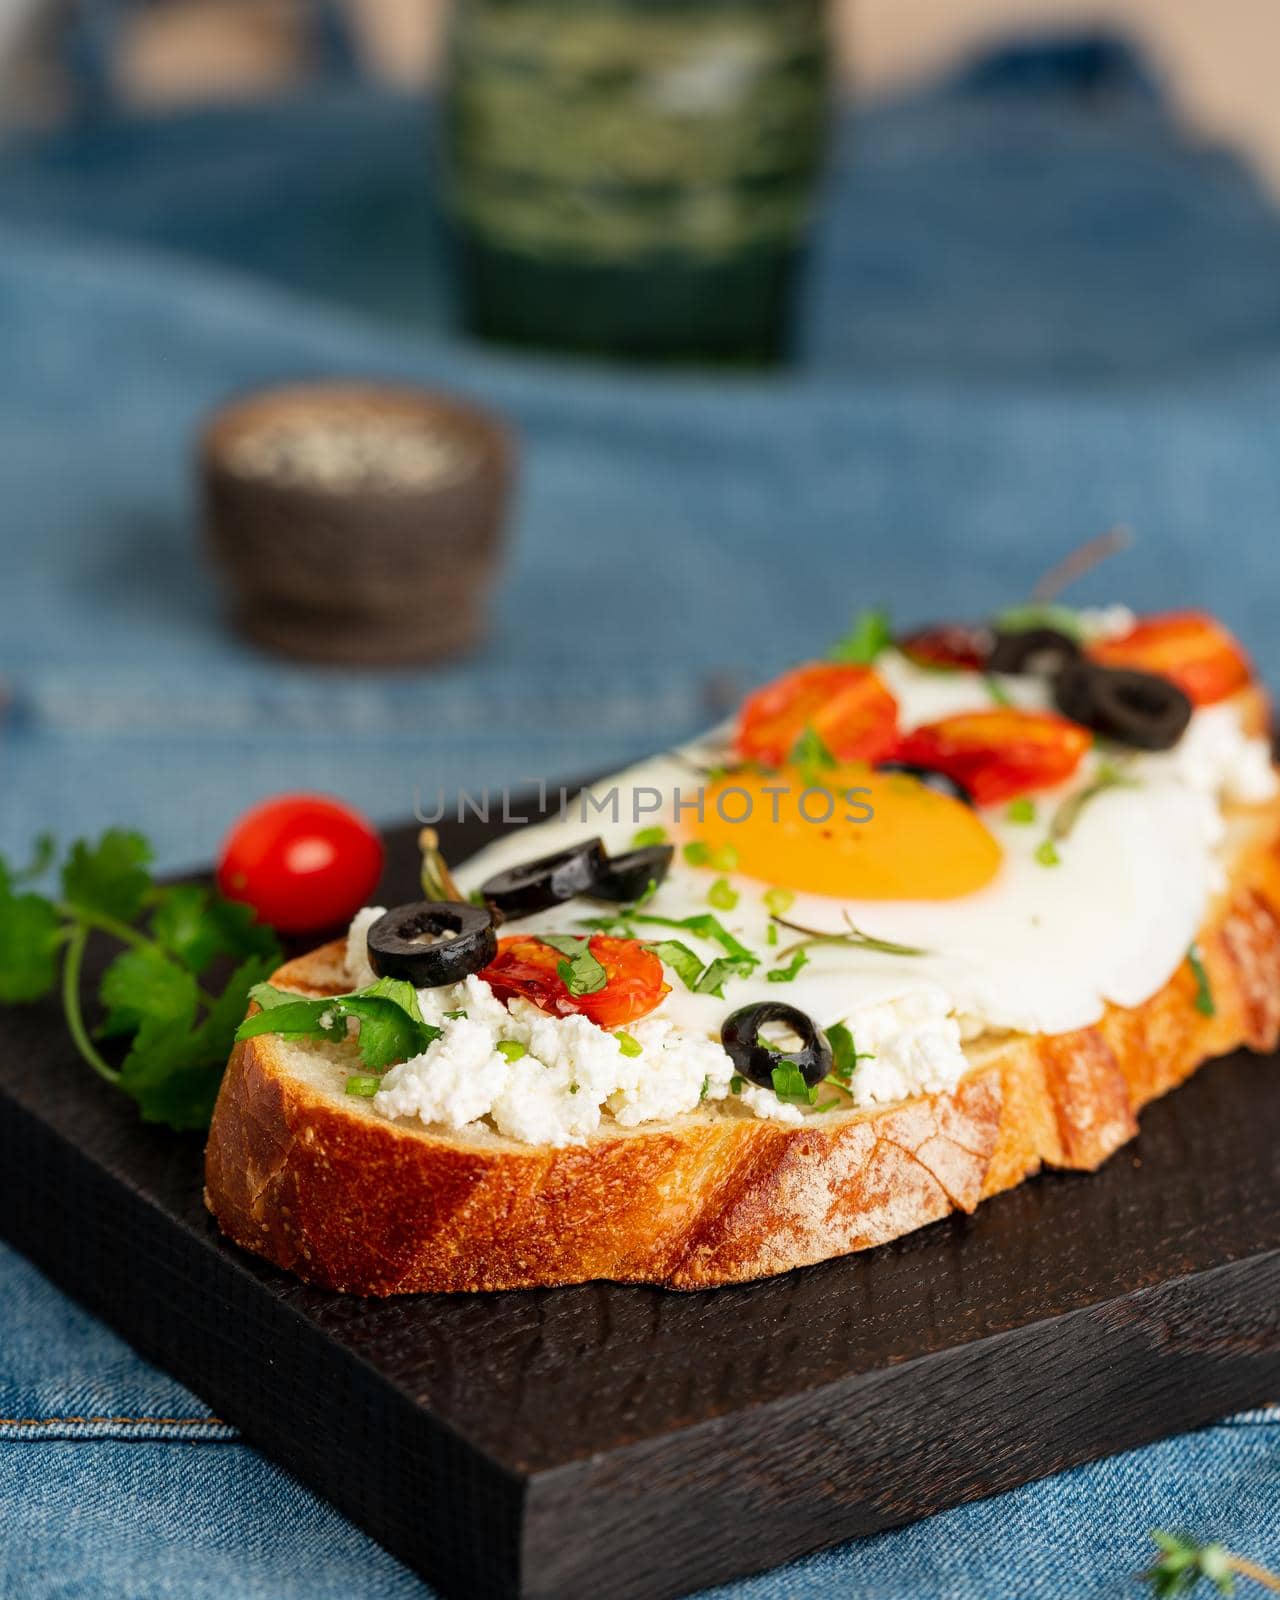 Toasted bread toast with fried eggs with yellow yolk and tomatoes, vertical by NataBene